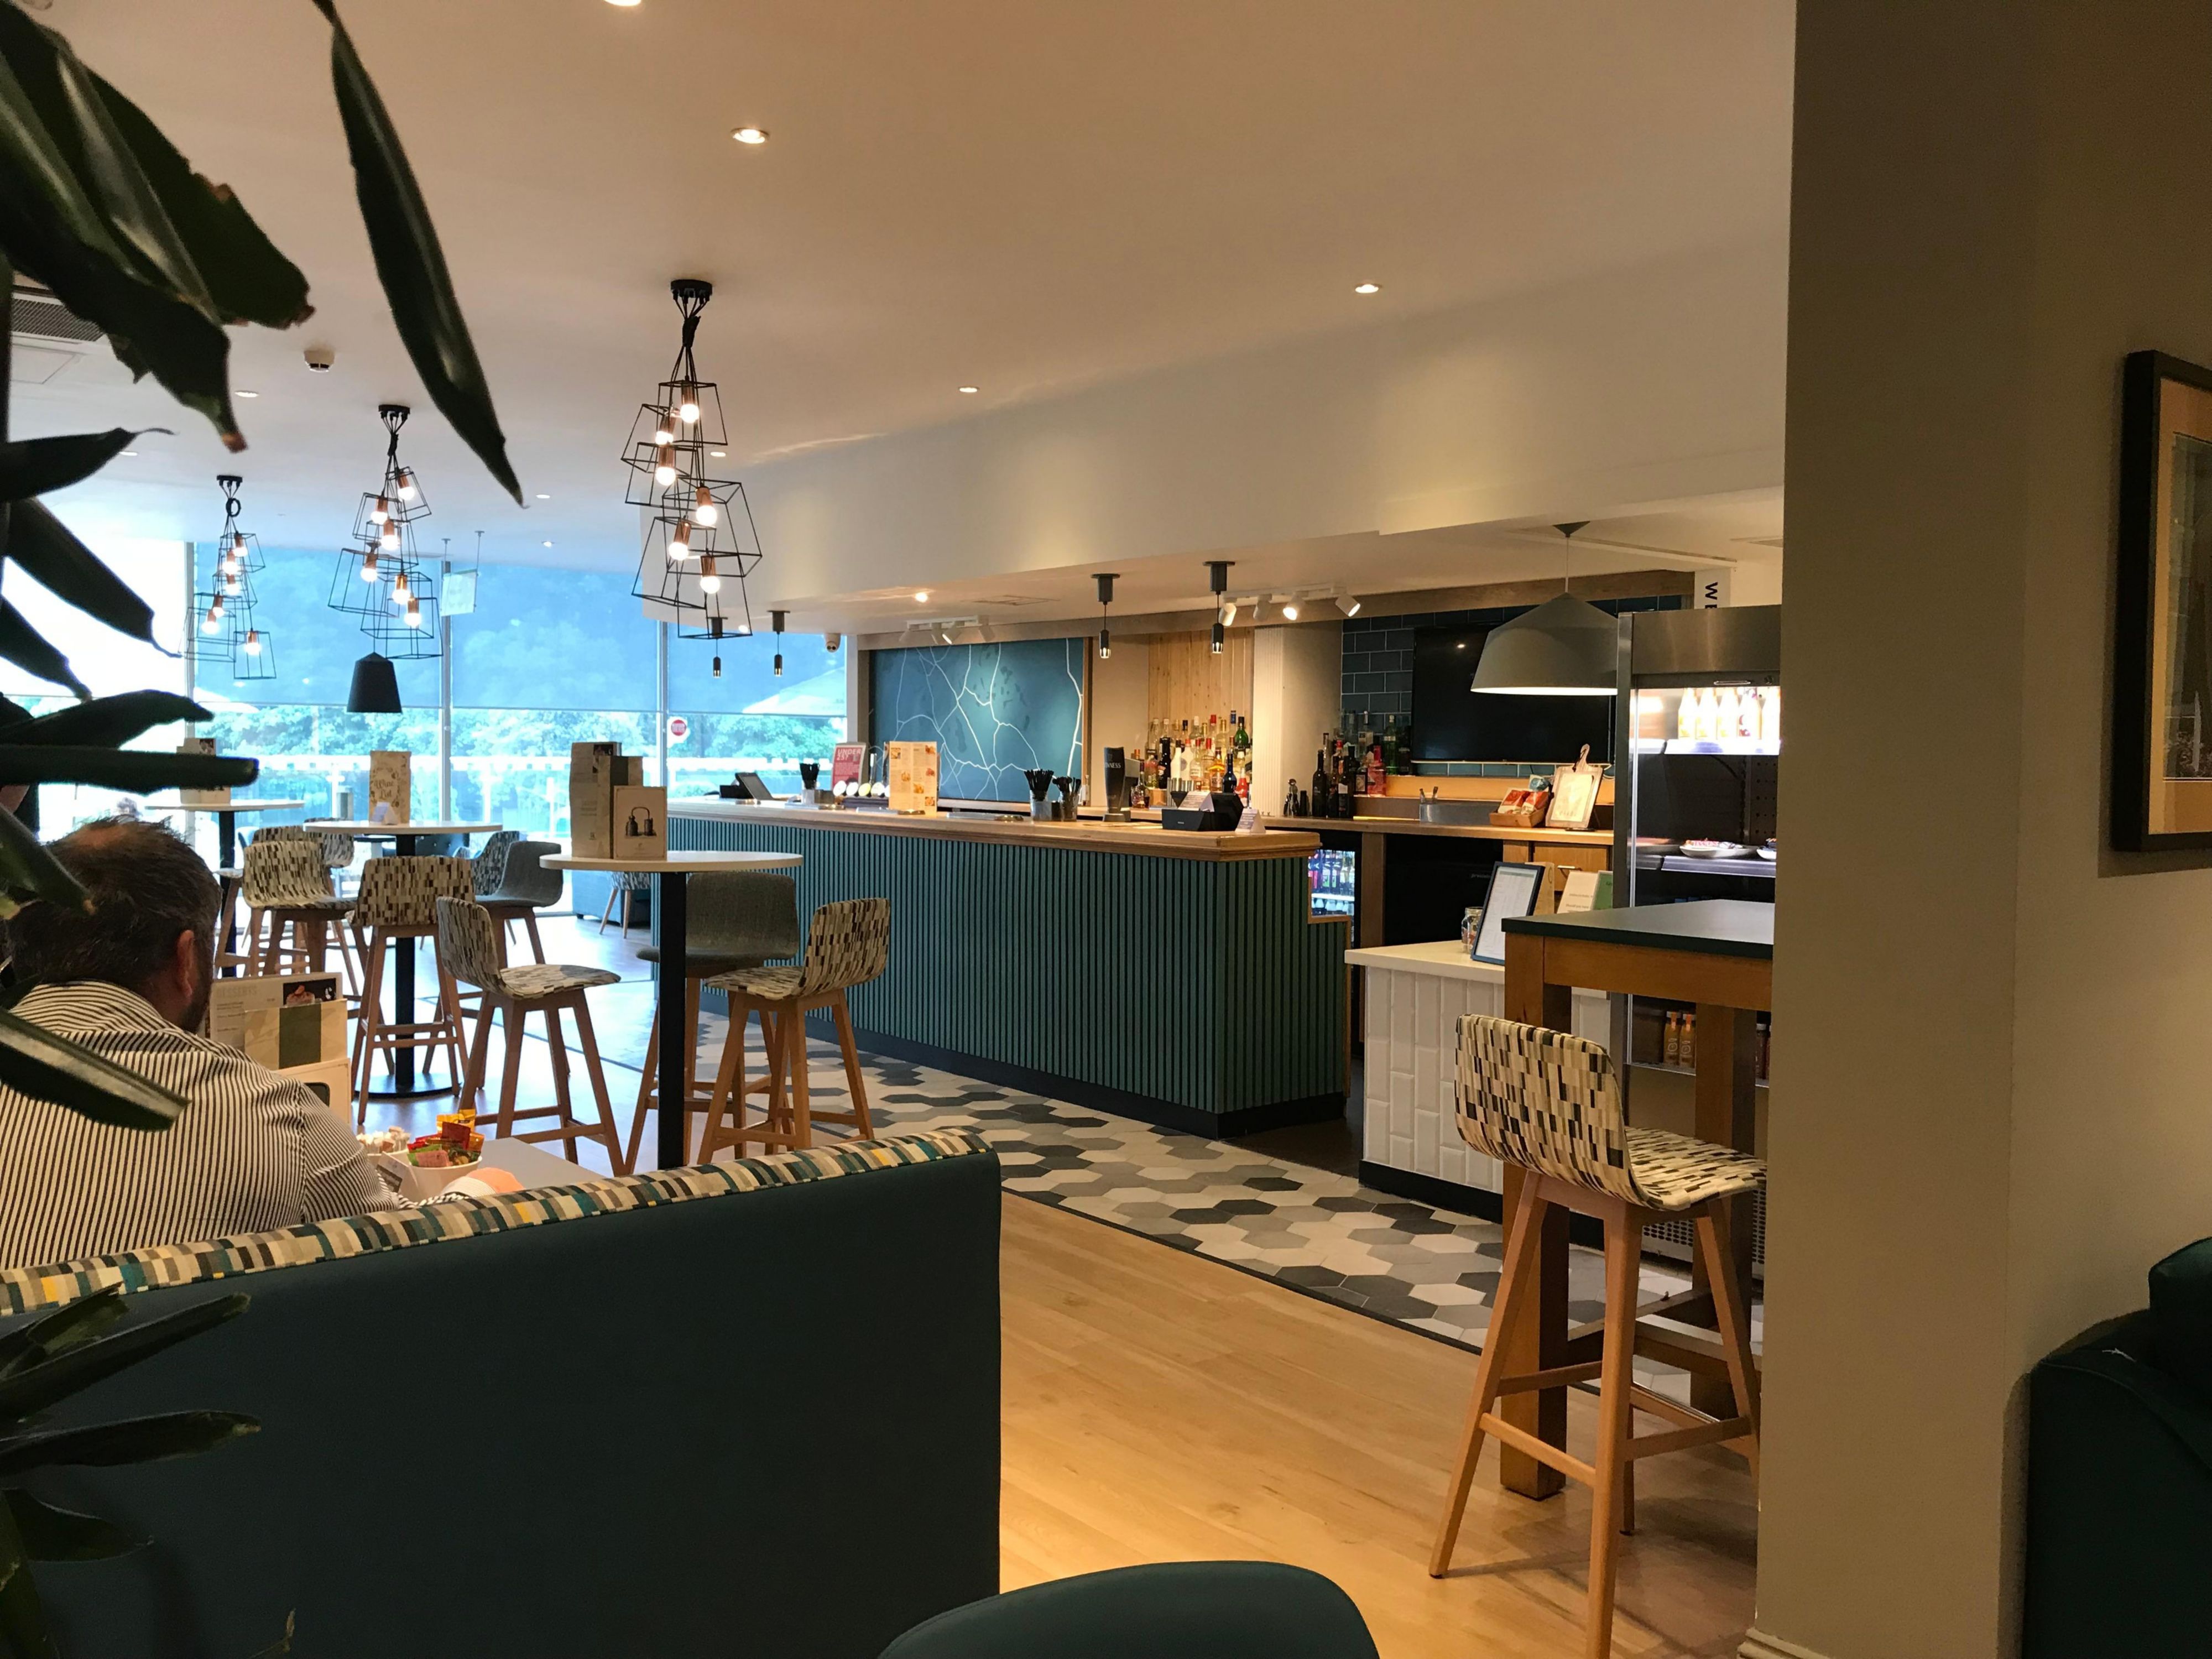 With several tasty options for food and drink at Holiday Inn Rugby - Northampton M1 J18, there’s something for every taste and occasion from our Open Lobby dine all day menu. We also have ample outdoor seating so you can enjoy a spot of al fresco dining on warmer days. 